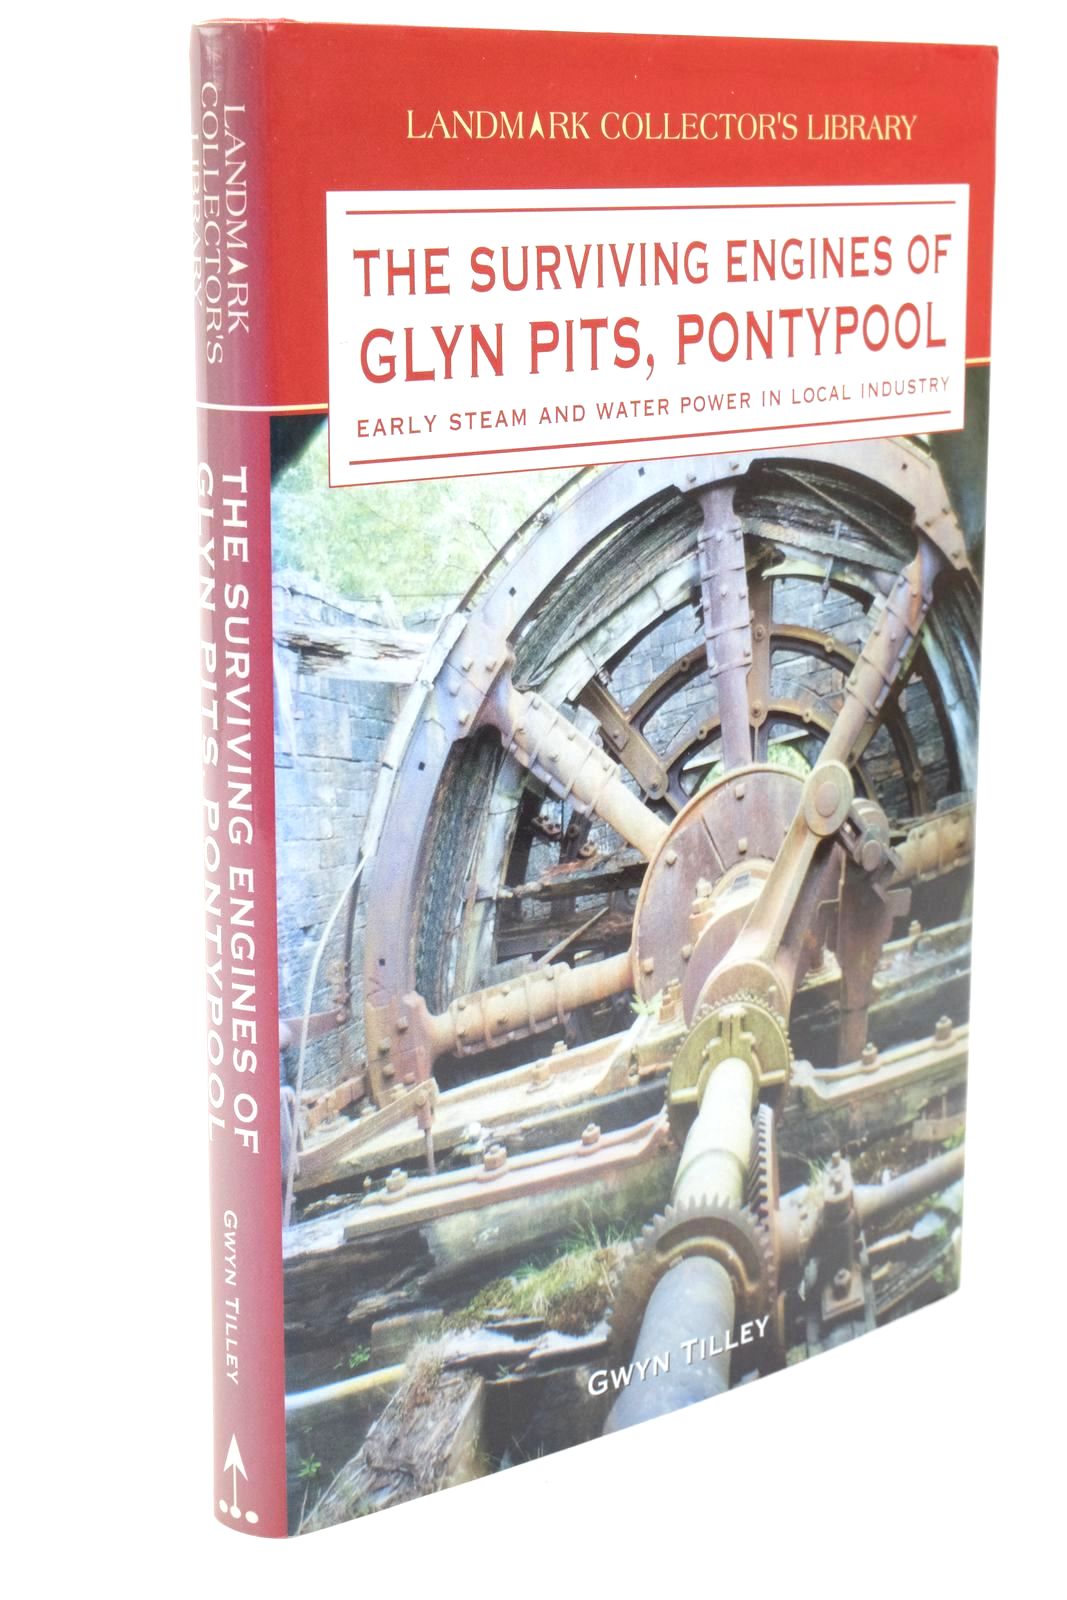 Photo of THE SURVIVING ENGINES OF GLYN PITS PONTYPOOL written by Tilley, Gwyn published by Landmark Publishing (STOCK CODE: 1322806)  for sale by Stella & Rose's Books